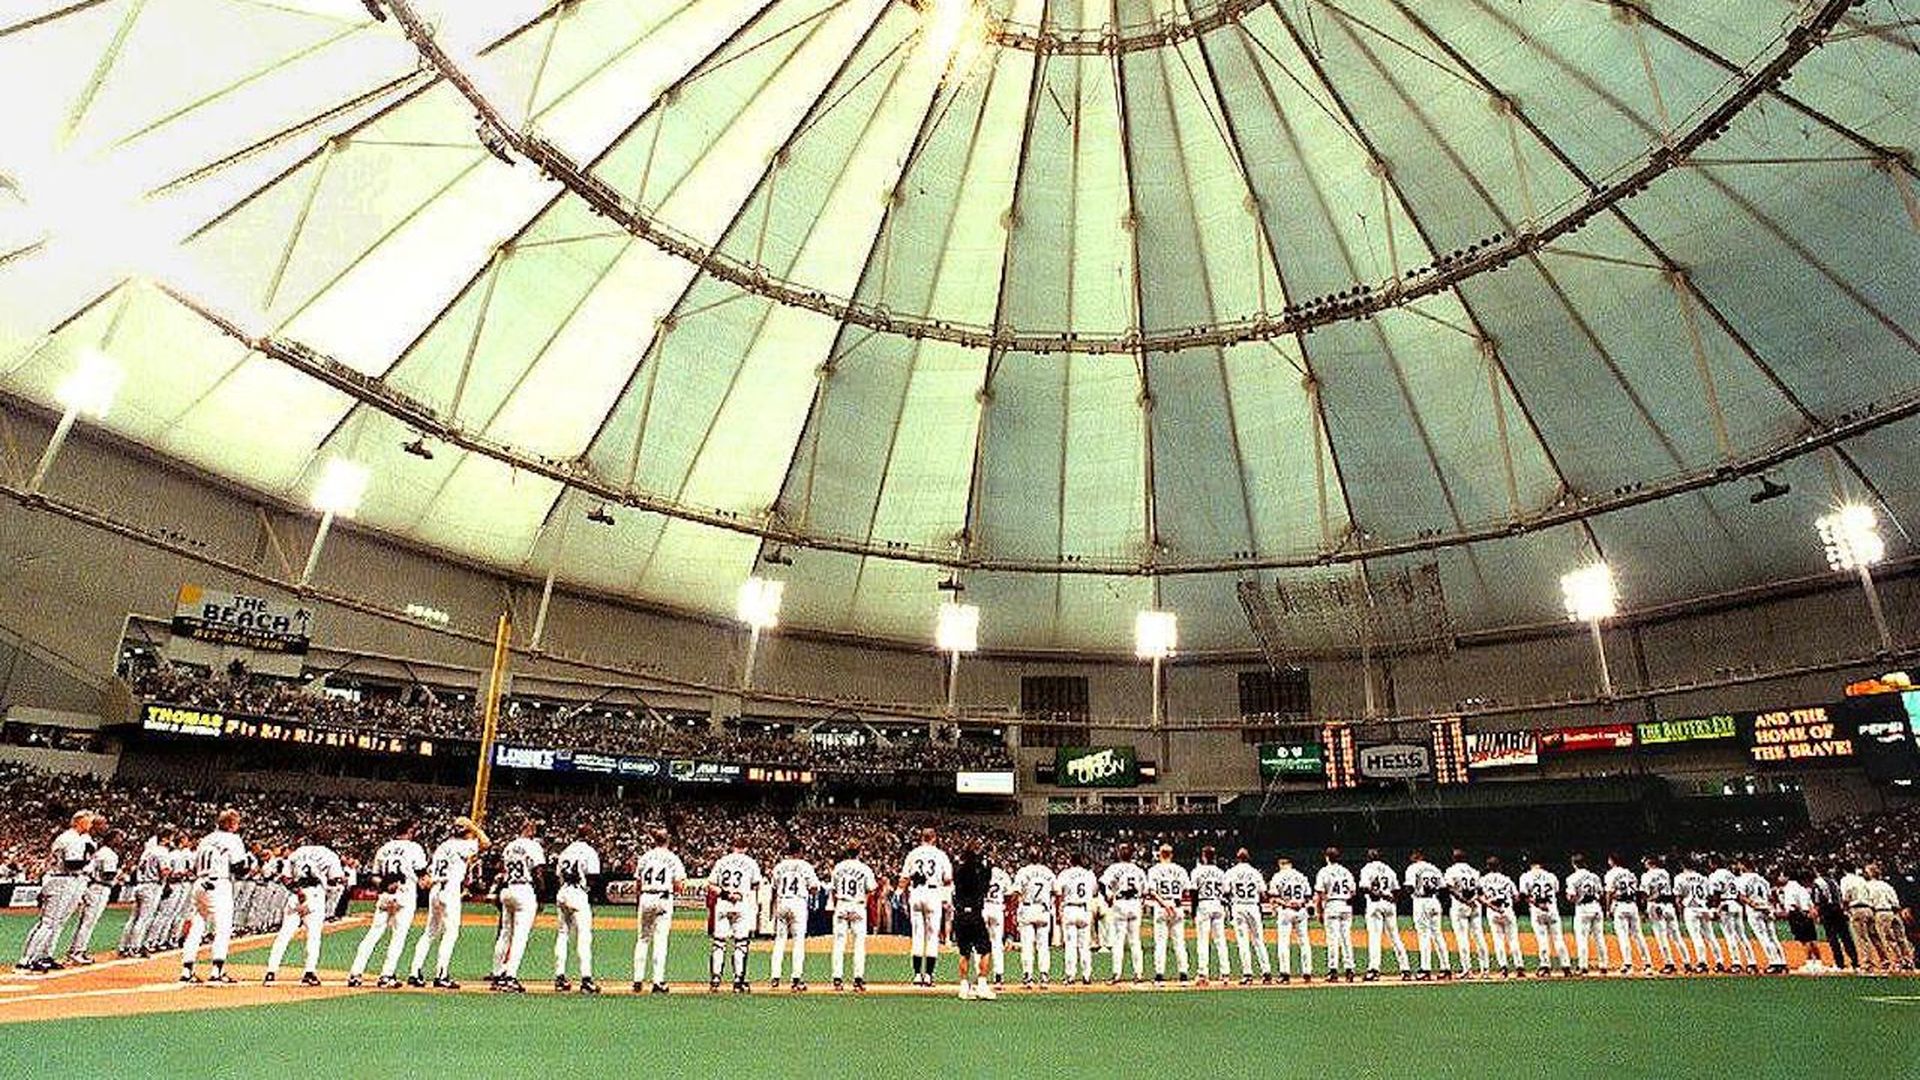 New WEDU documentary on Tampa Bay Rays' rise airs on Opening Day